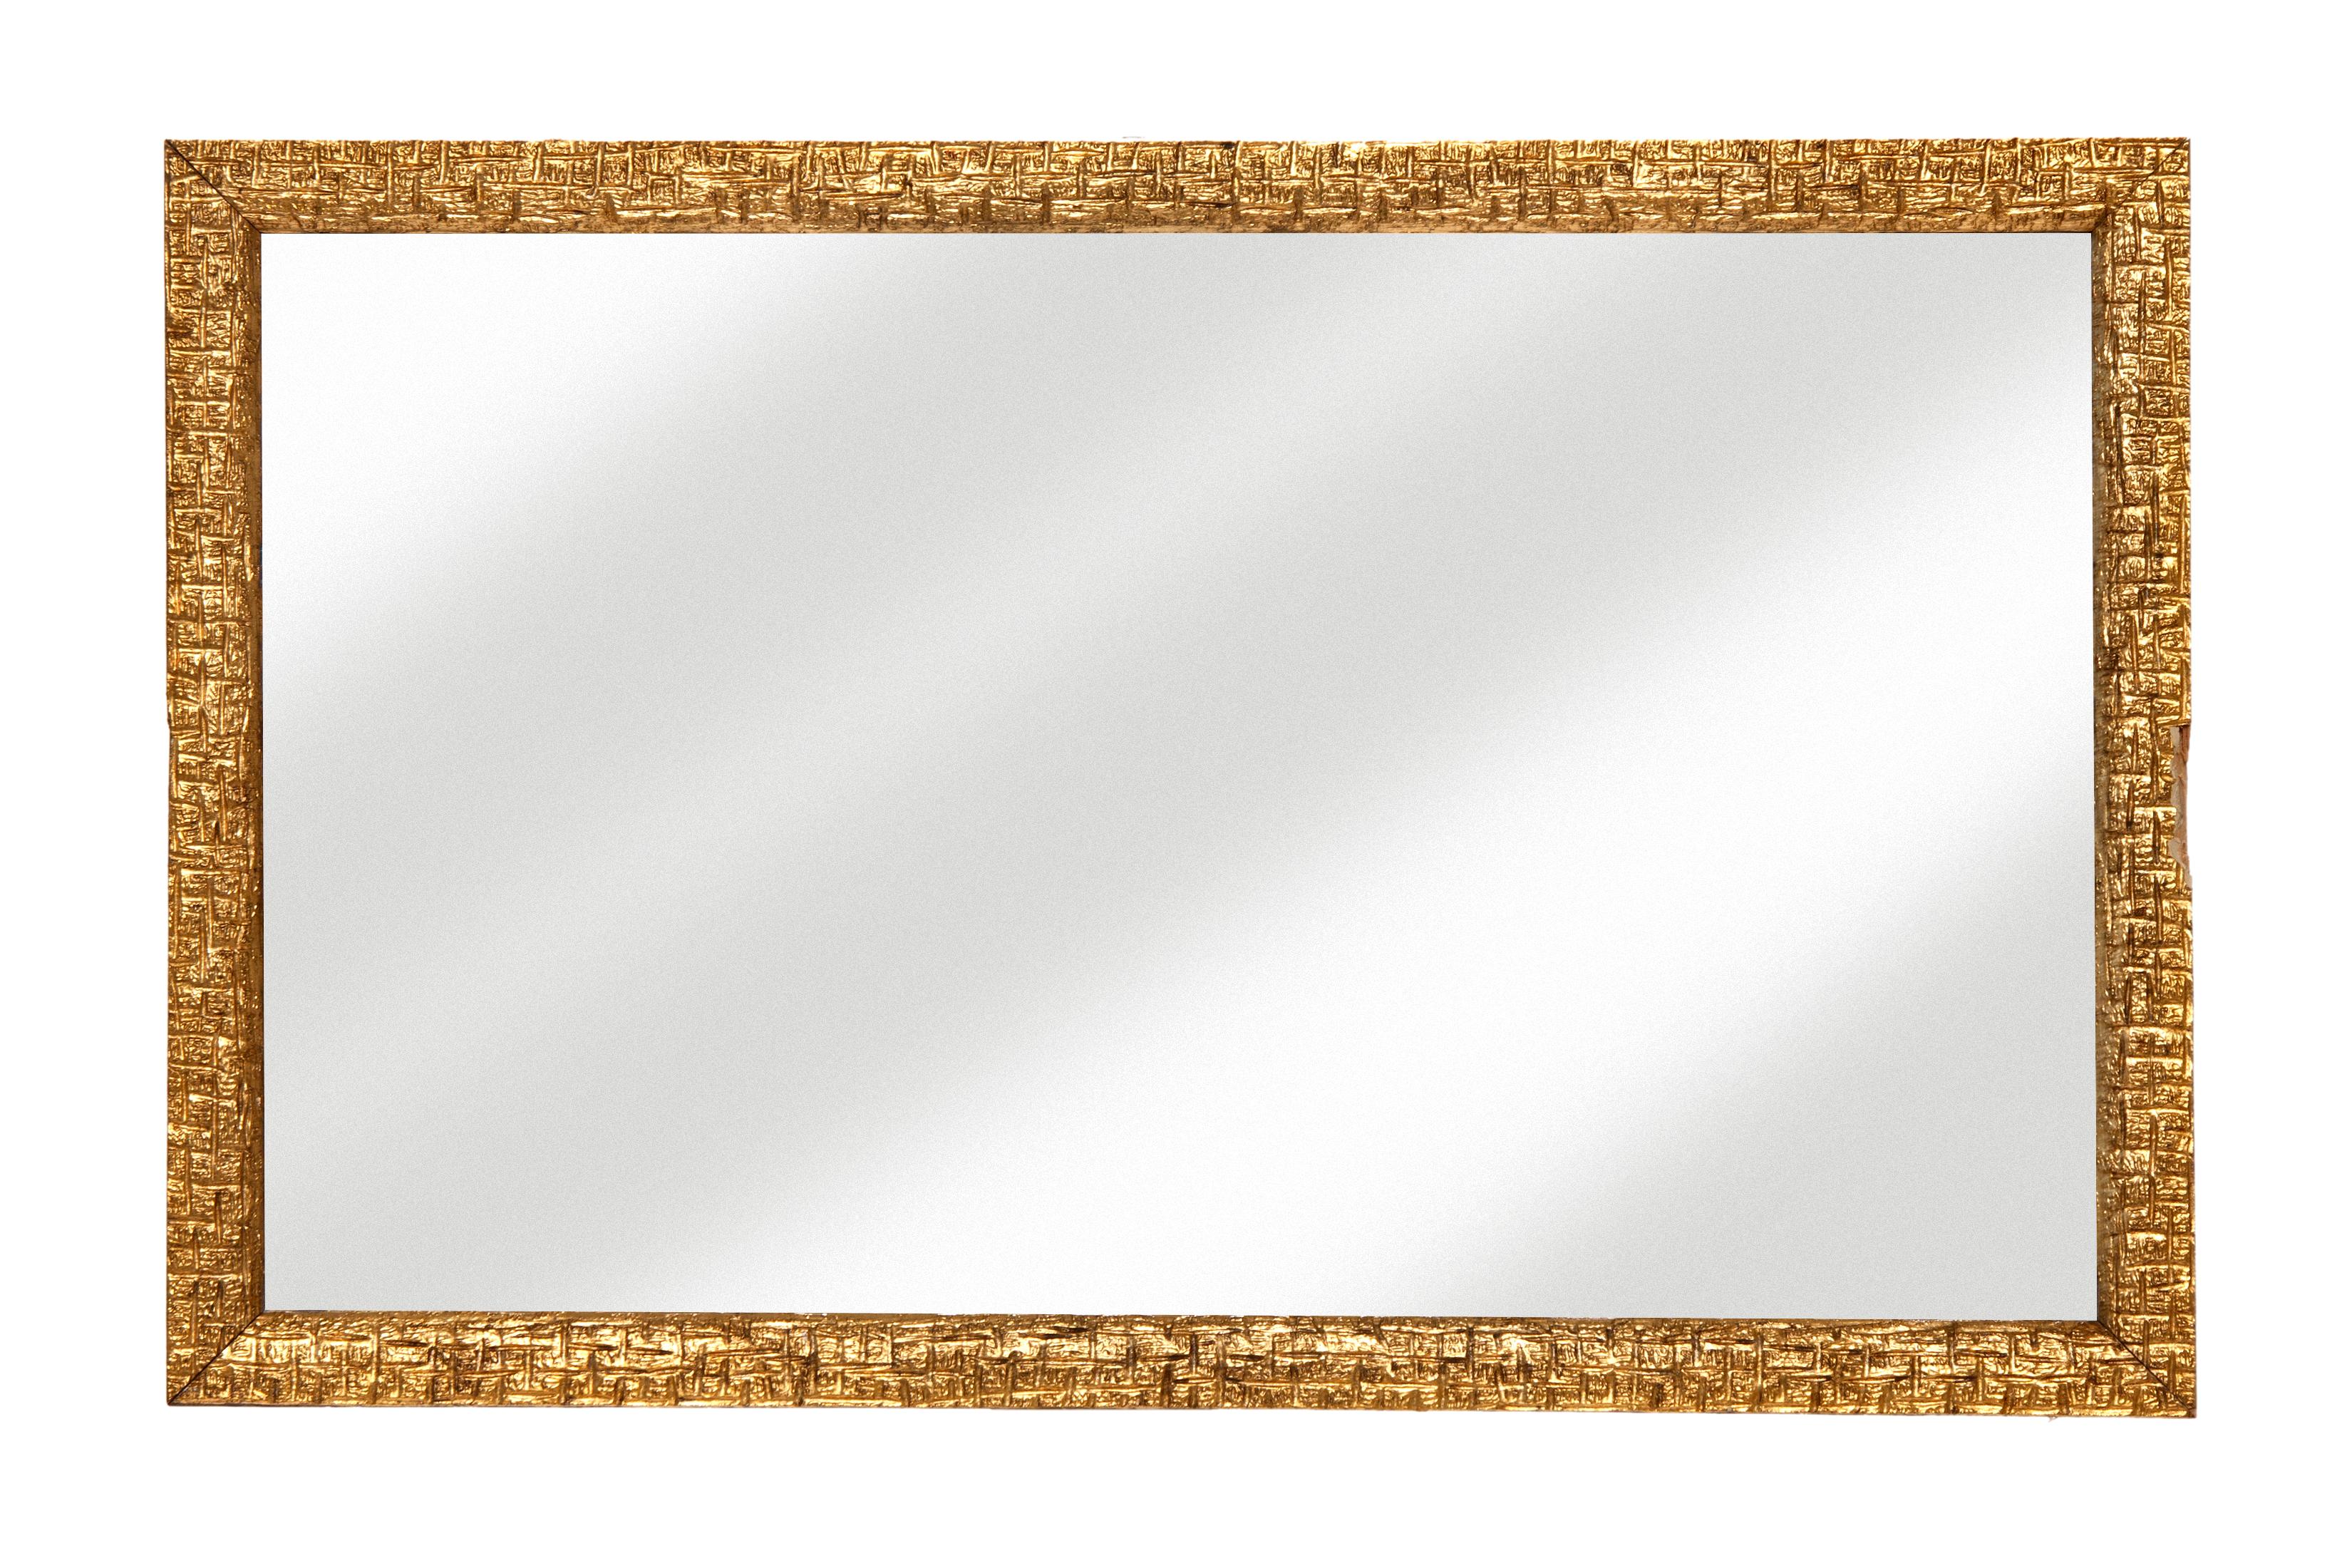 The gilt frame has a pattern that looks like bark, handcrafter with a rough geometric pattern through-out. Very unusual for its age. Wired to hand both ways. New glass & backing. Available here for a limited time, may no longer be available on this